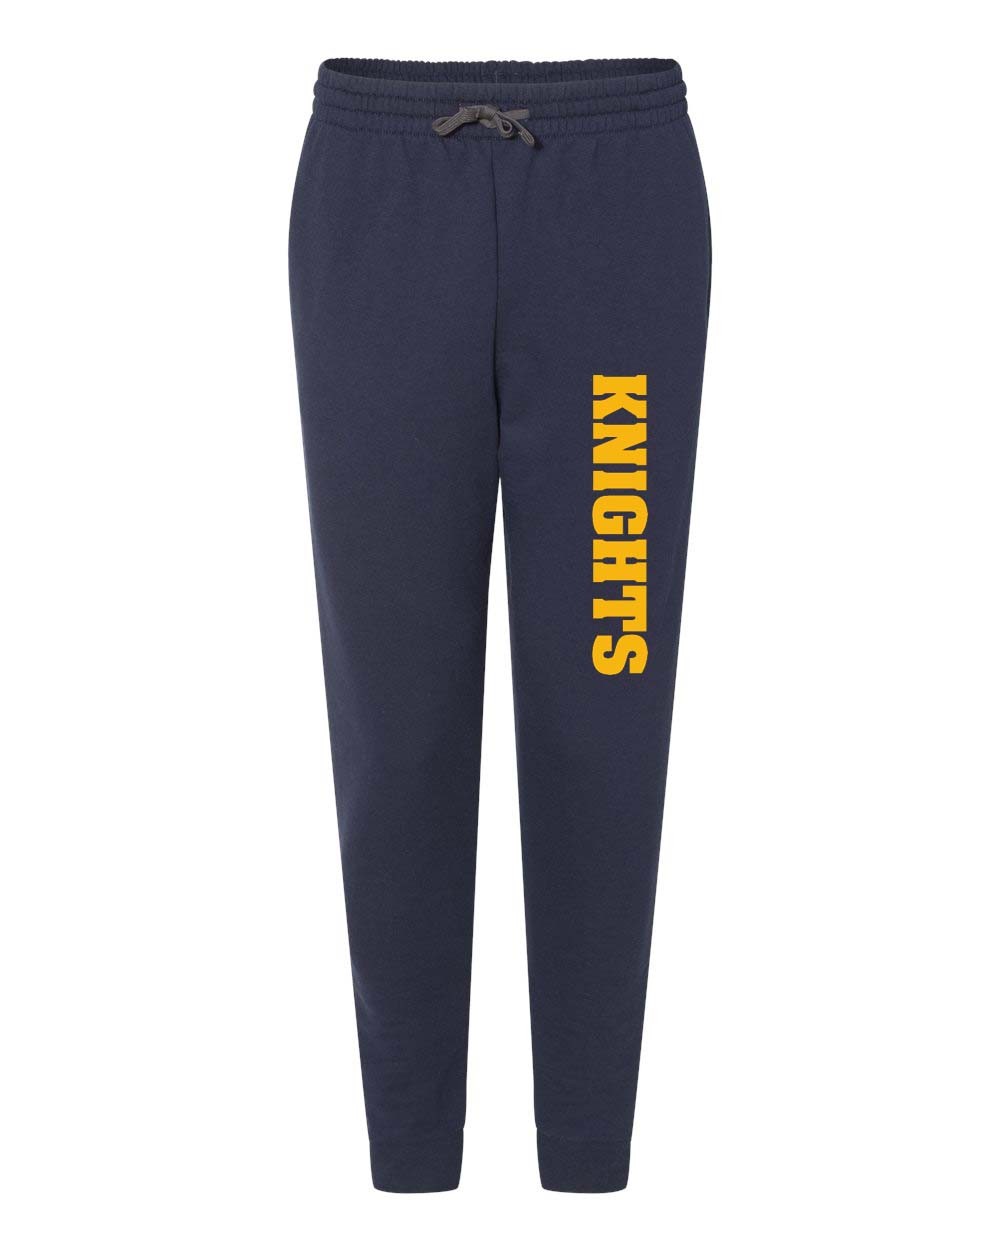 ANN Spirit Joggers w/ Knights Logo - Please Allow 2-3 Weeks for Delivery